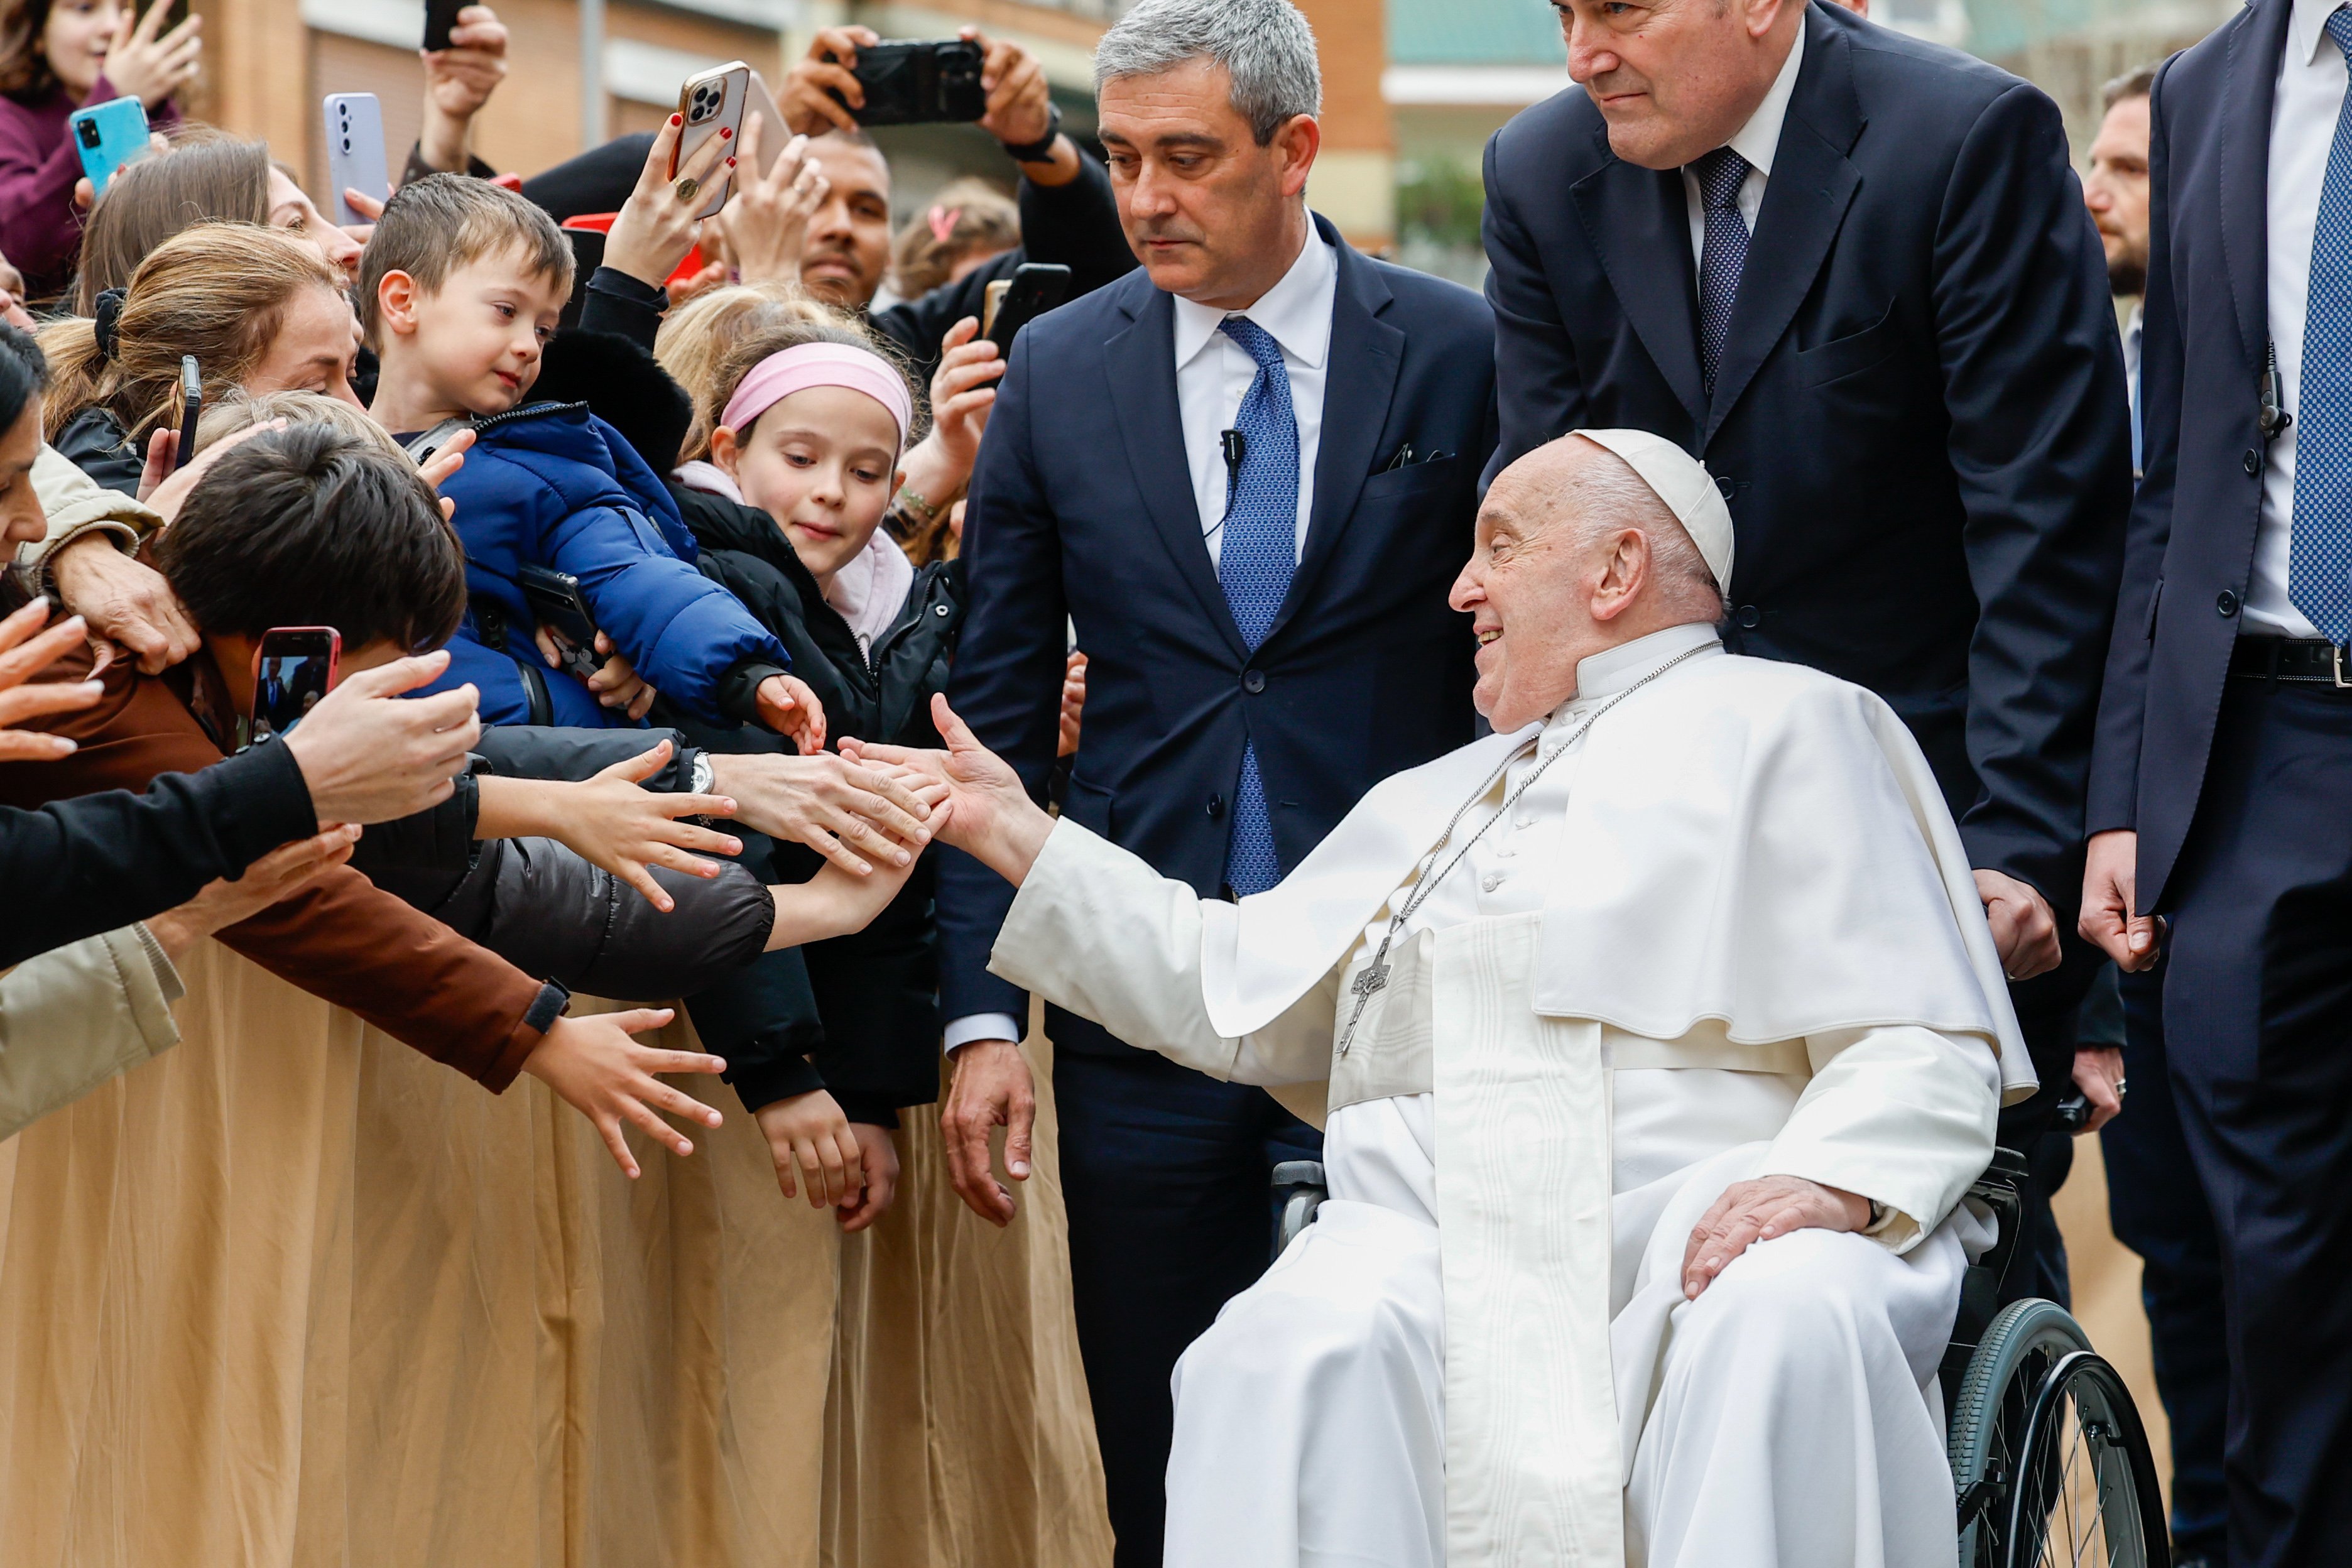 Pope Francis greets children.